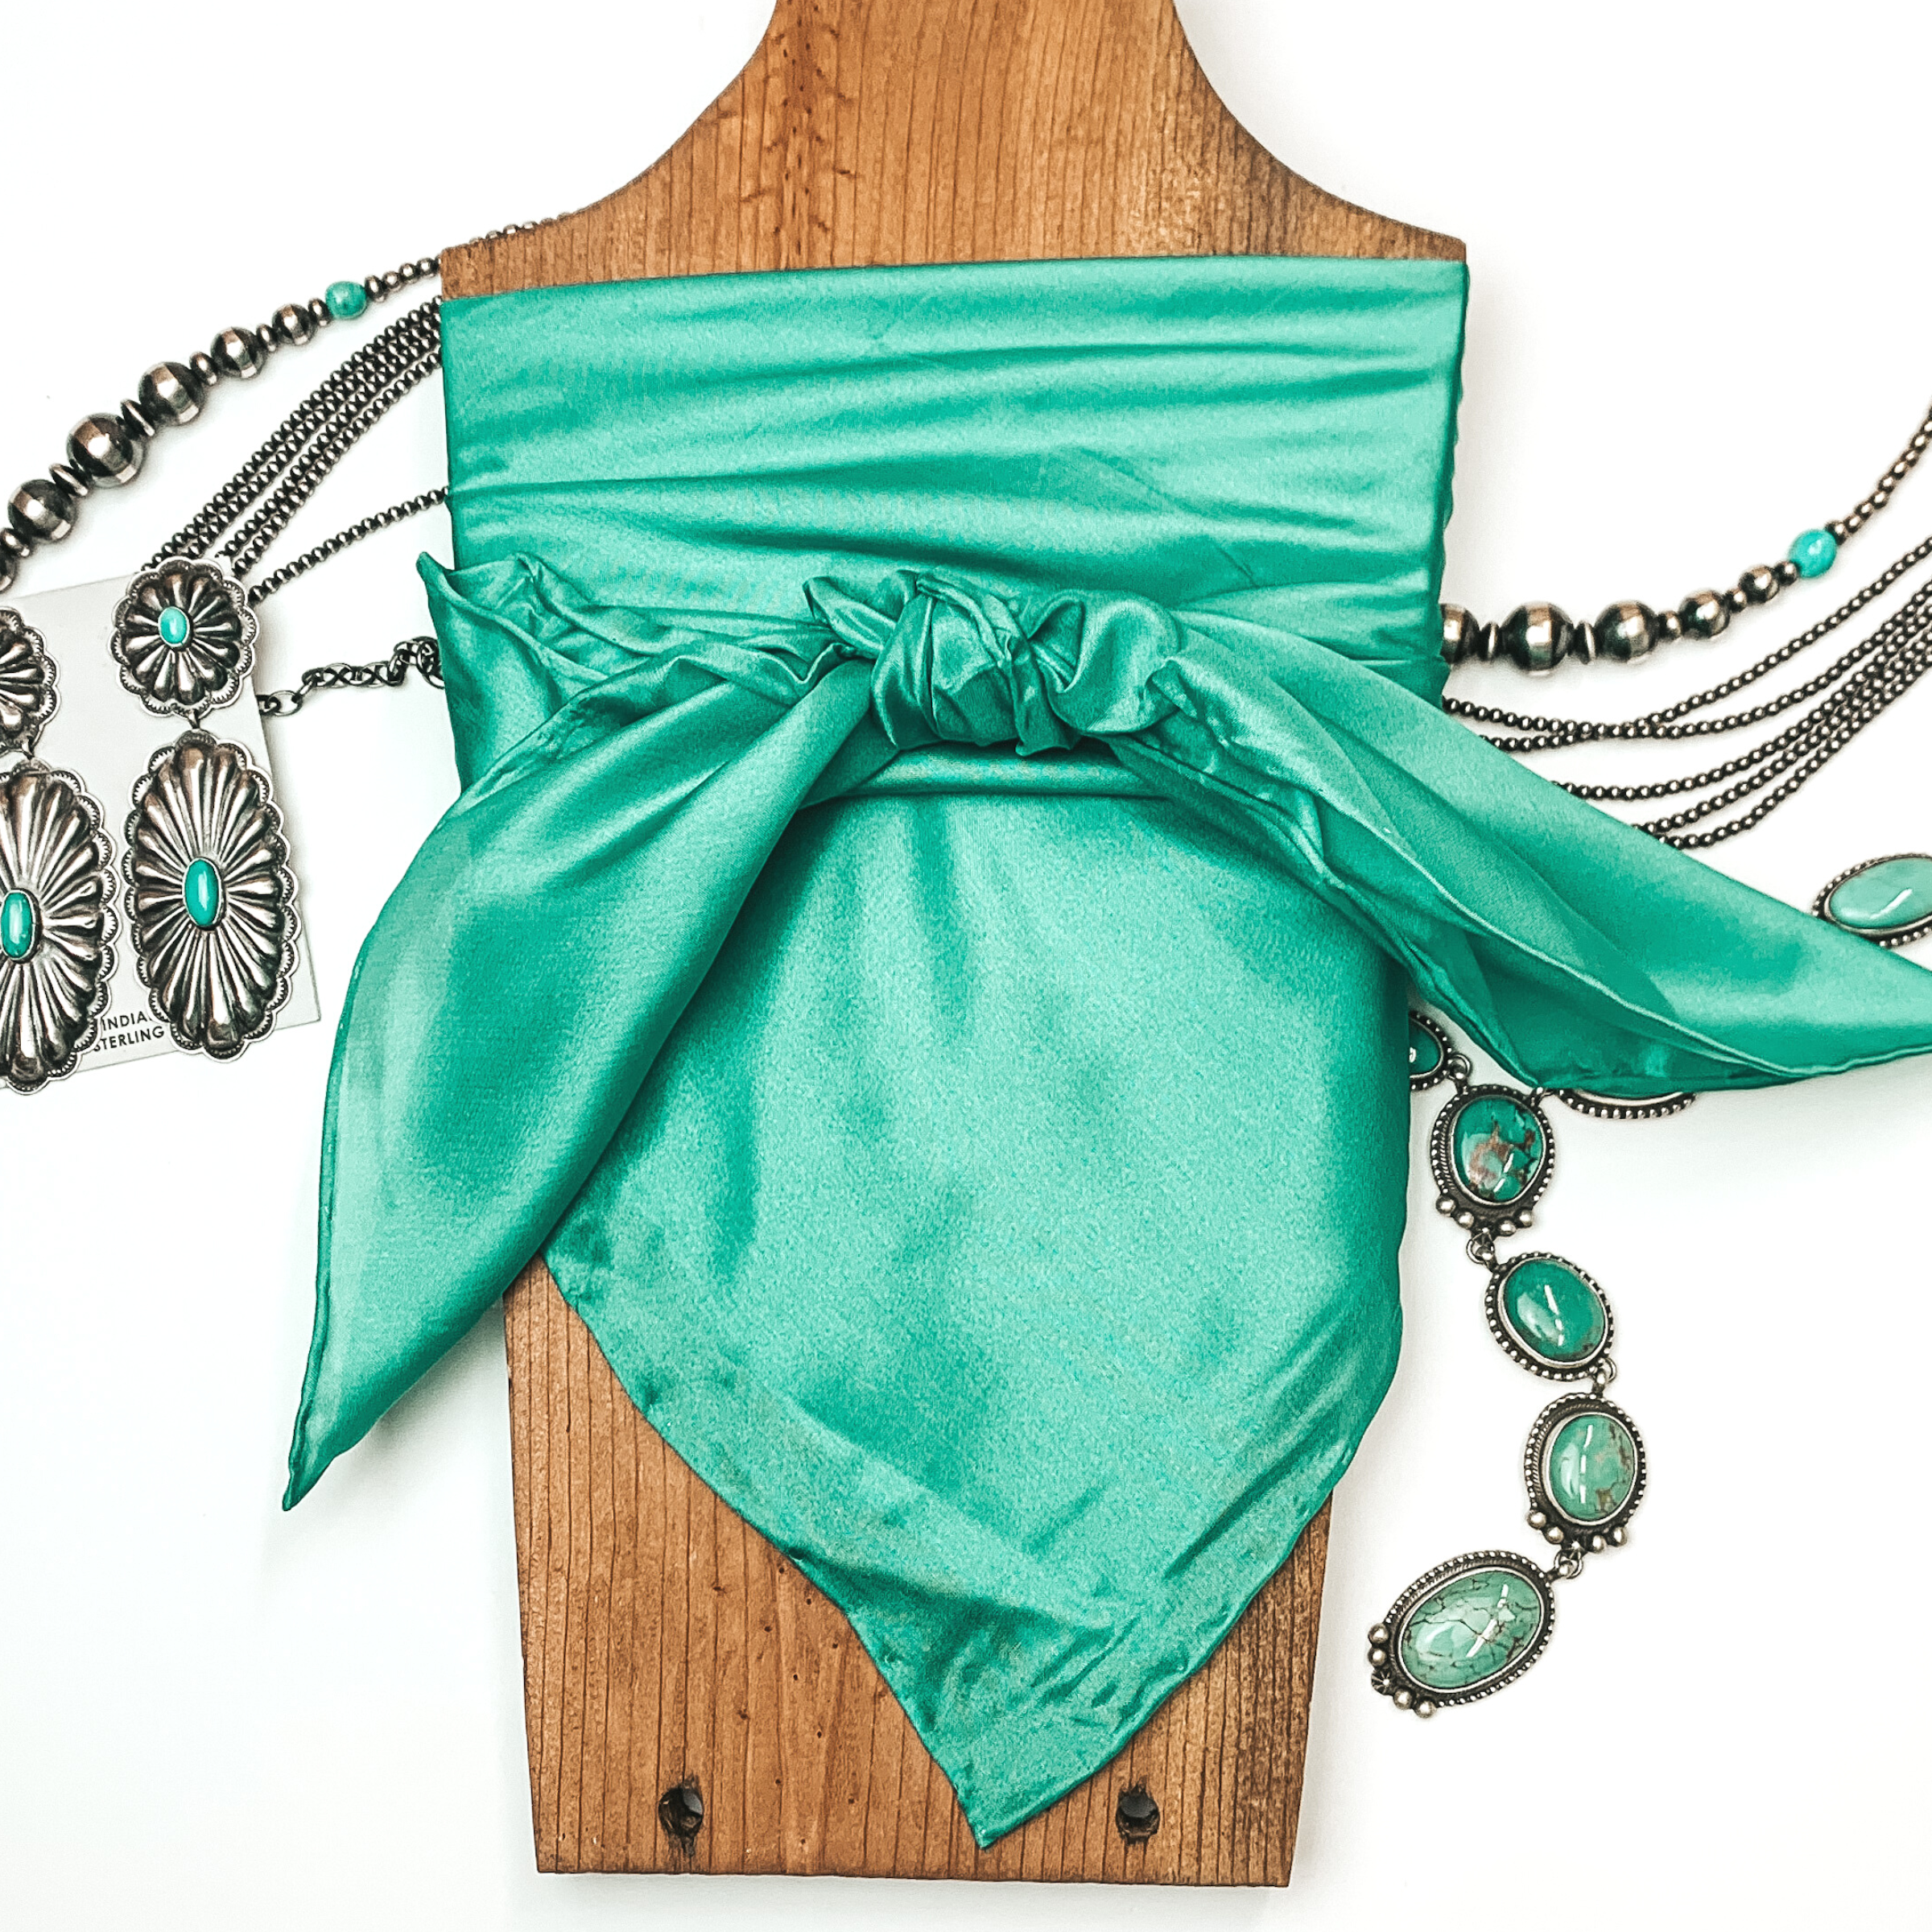 This is a emerald green silk wild rag, this wild rag is pictured wrapped around a brown necklace board. This wild rag is pictured on a white background and with silver and turquoise Navajo jewelry behind it as decoration.